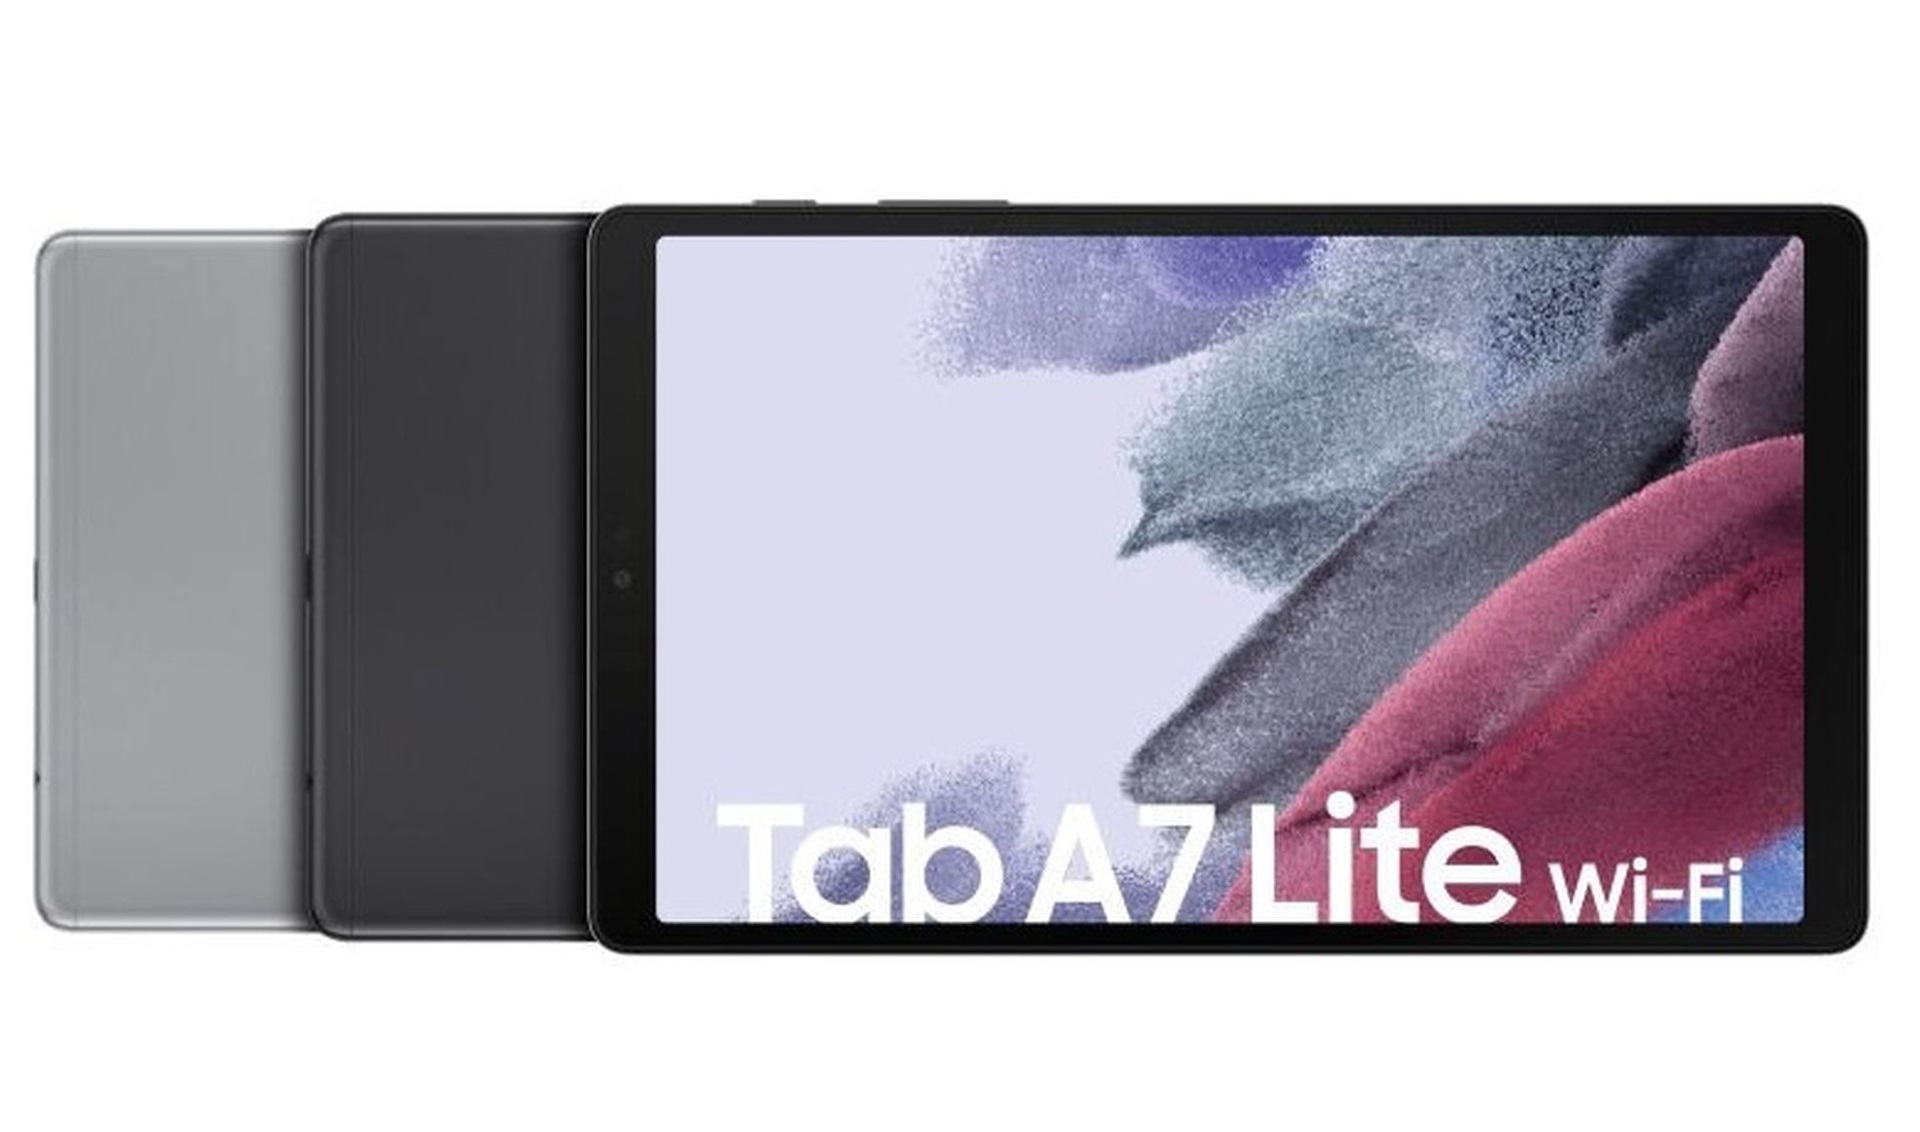 Samsung Galaxy Tab A7 Lite gains new features with One UI 5.1.1 update -  SamMobile